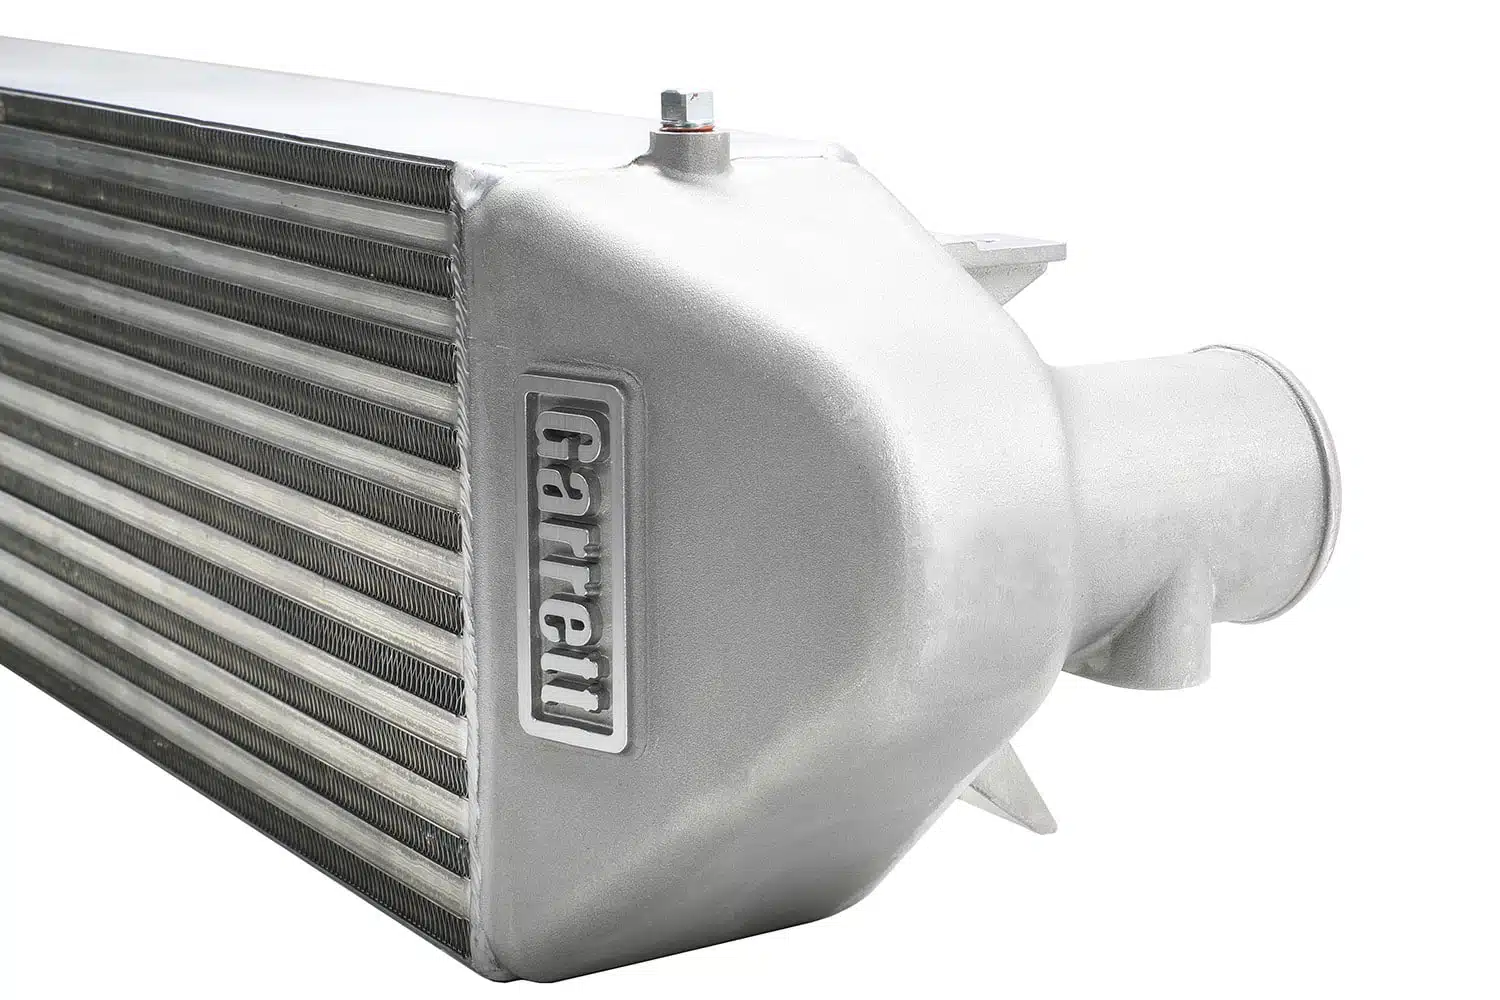 Turbocharger Intercooler/Charge Air Cooler FO3012102 CV6Z6K775A 2013-2018 Fits Ford Focus 2.0 Liter L4 Turbo Eng All Aluminum 